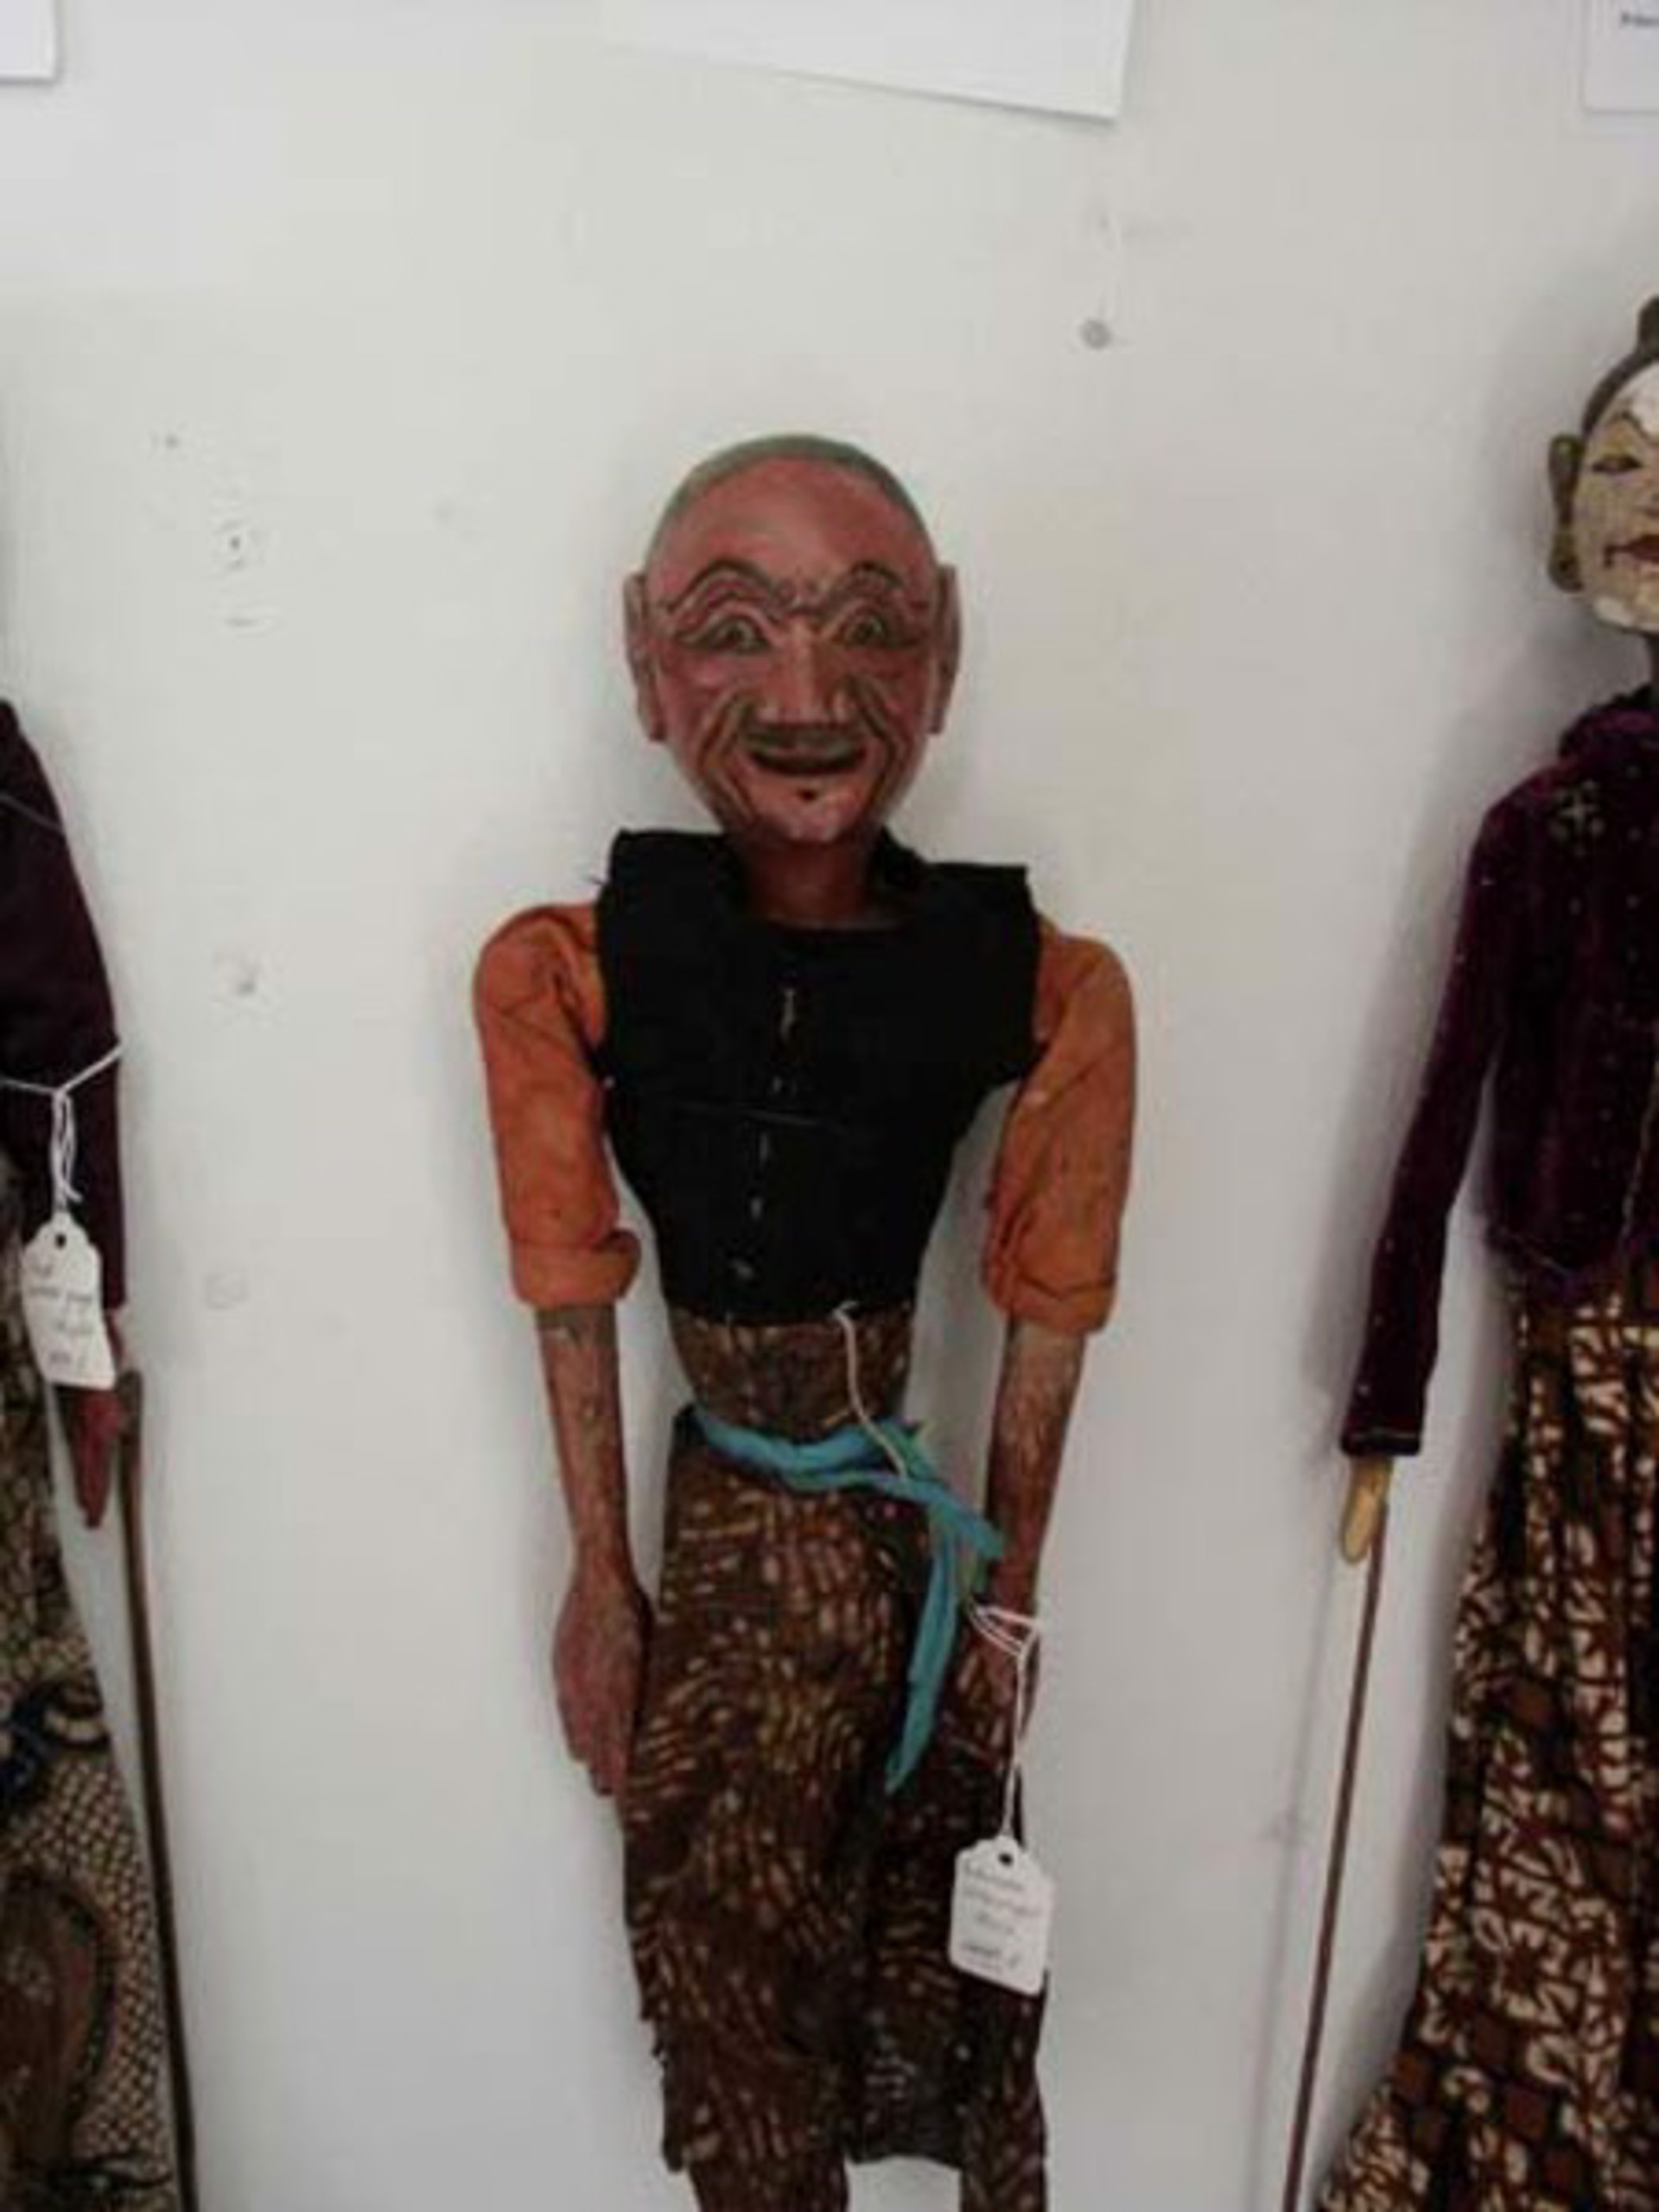 Golek Puppet (male) by Indonesian